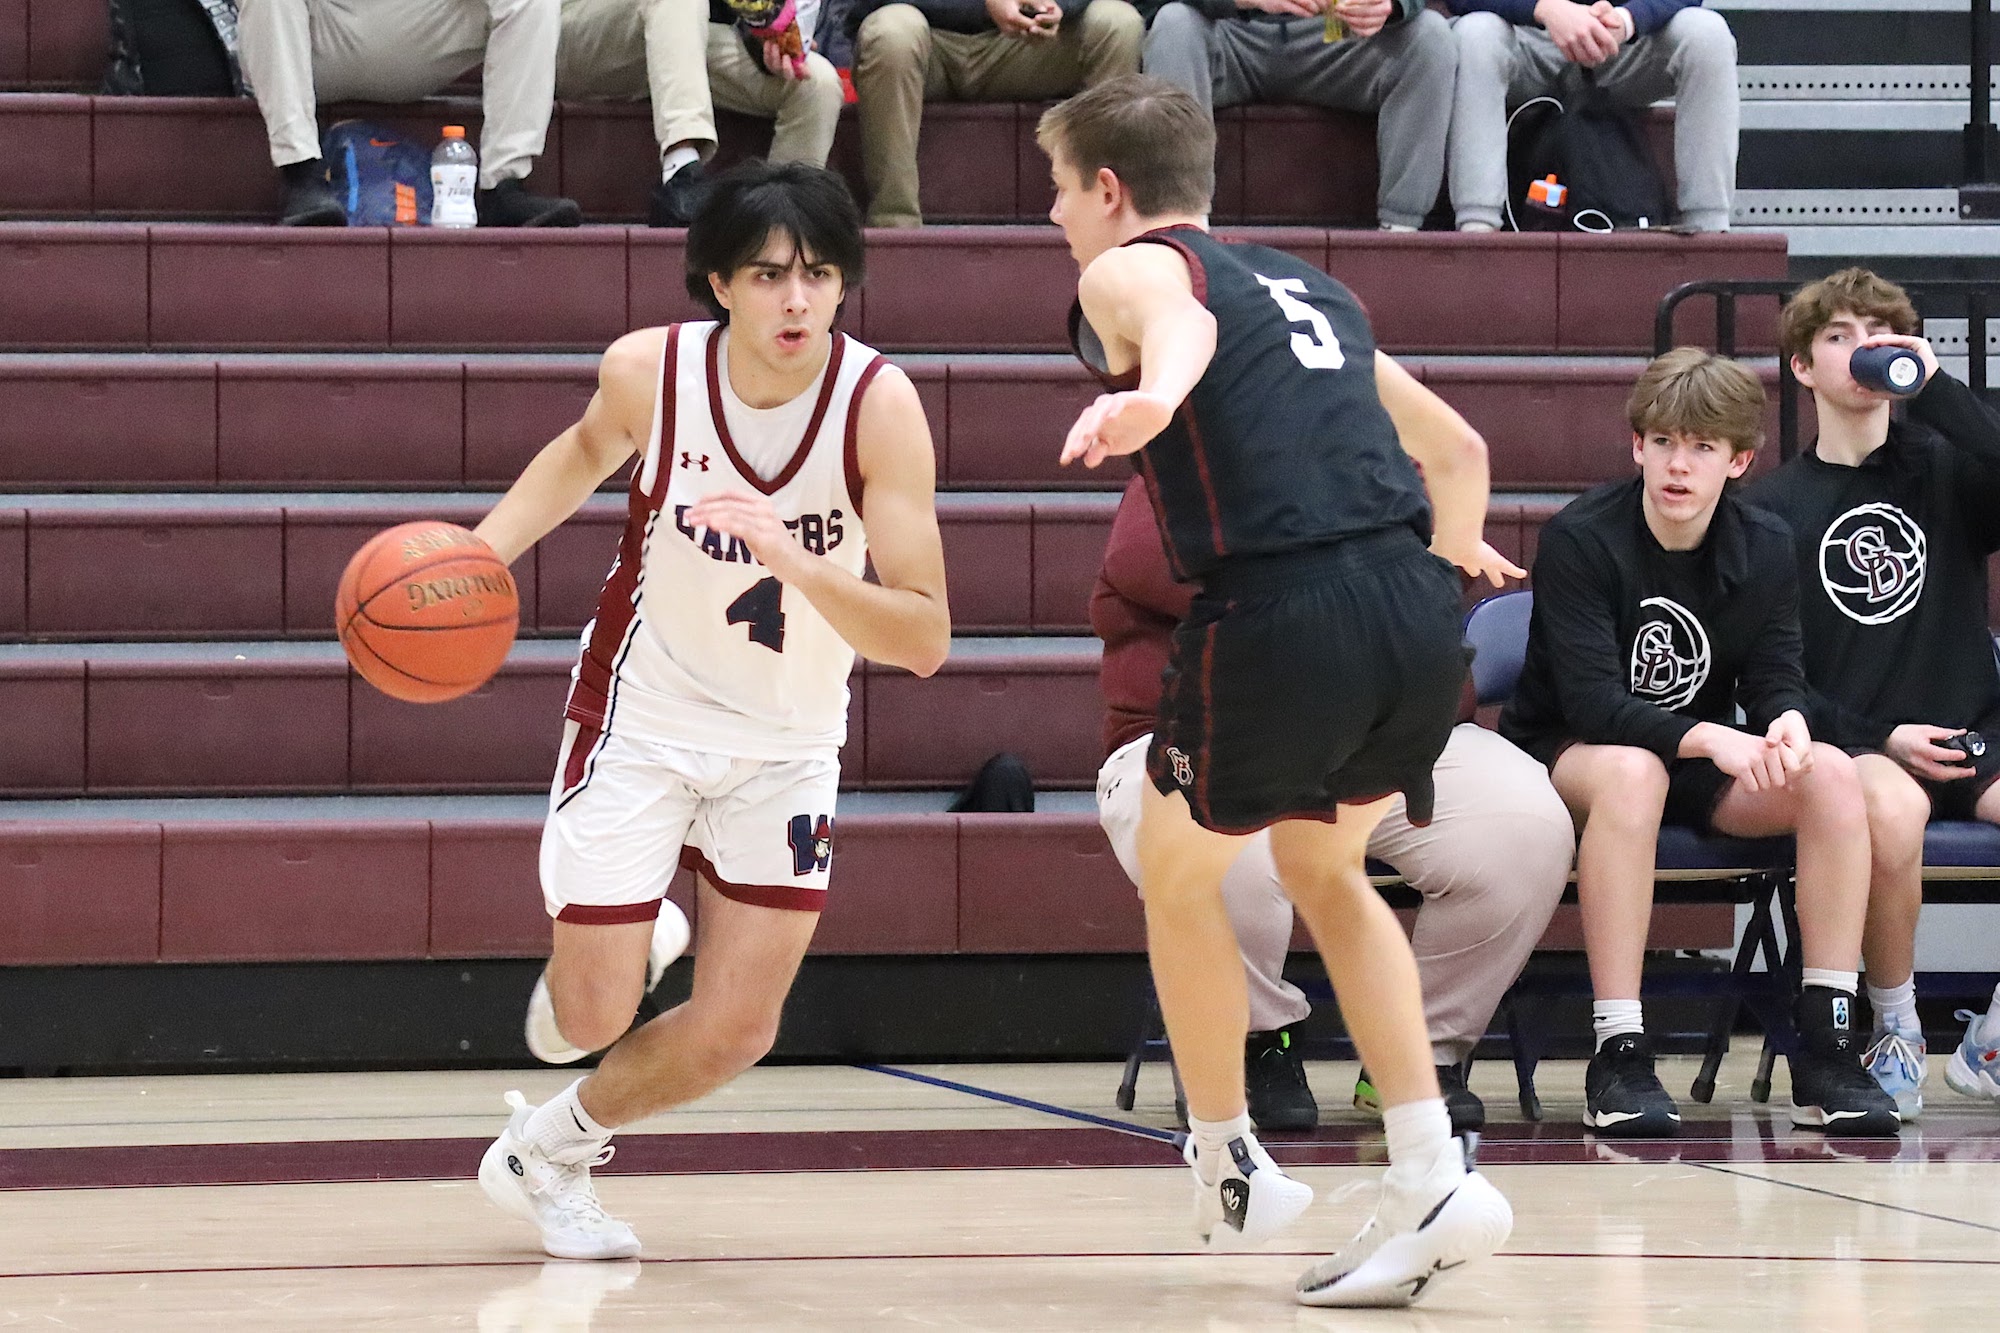 ‘We fully expected this’: Westborough basketball outmuscles G-D to qualify for state tournament